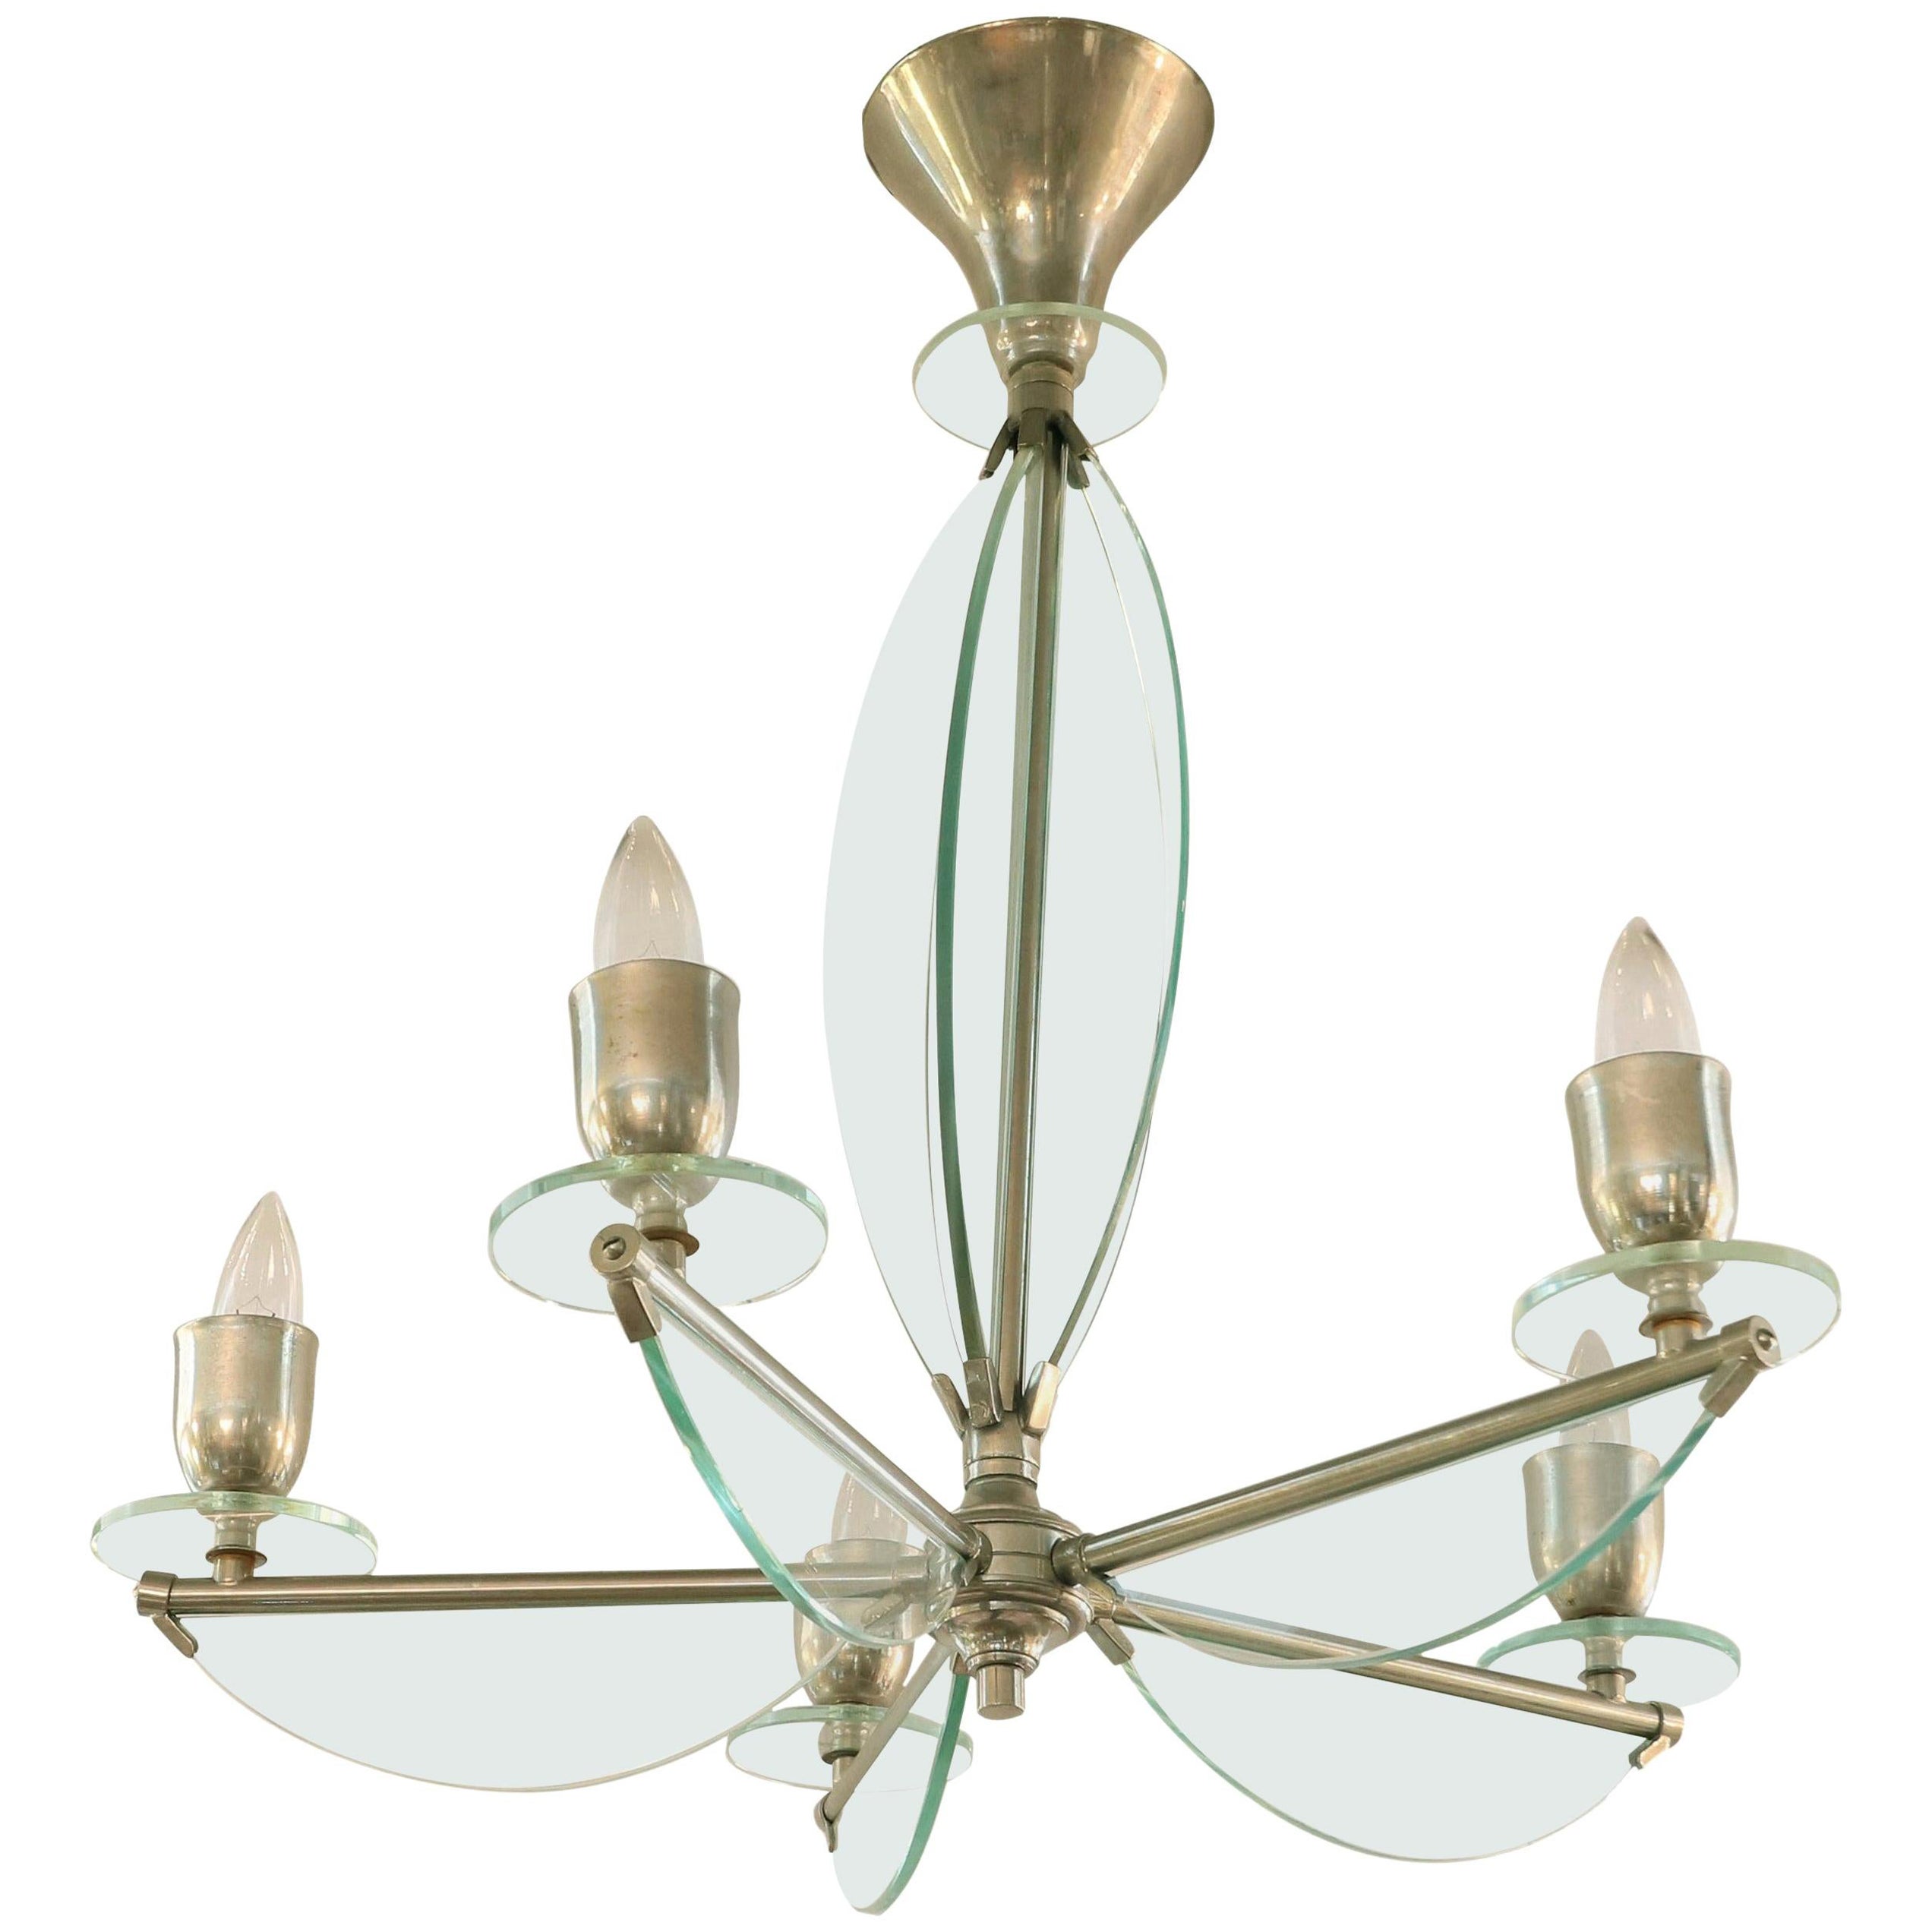 1950s Italian Glass and Chrome Chandelier with Five Lights